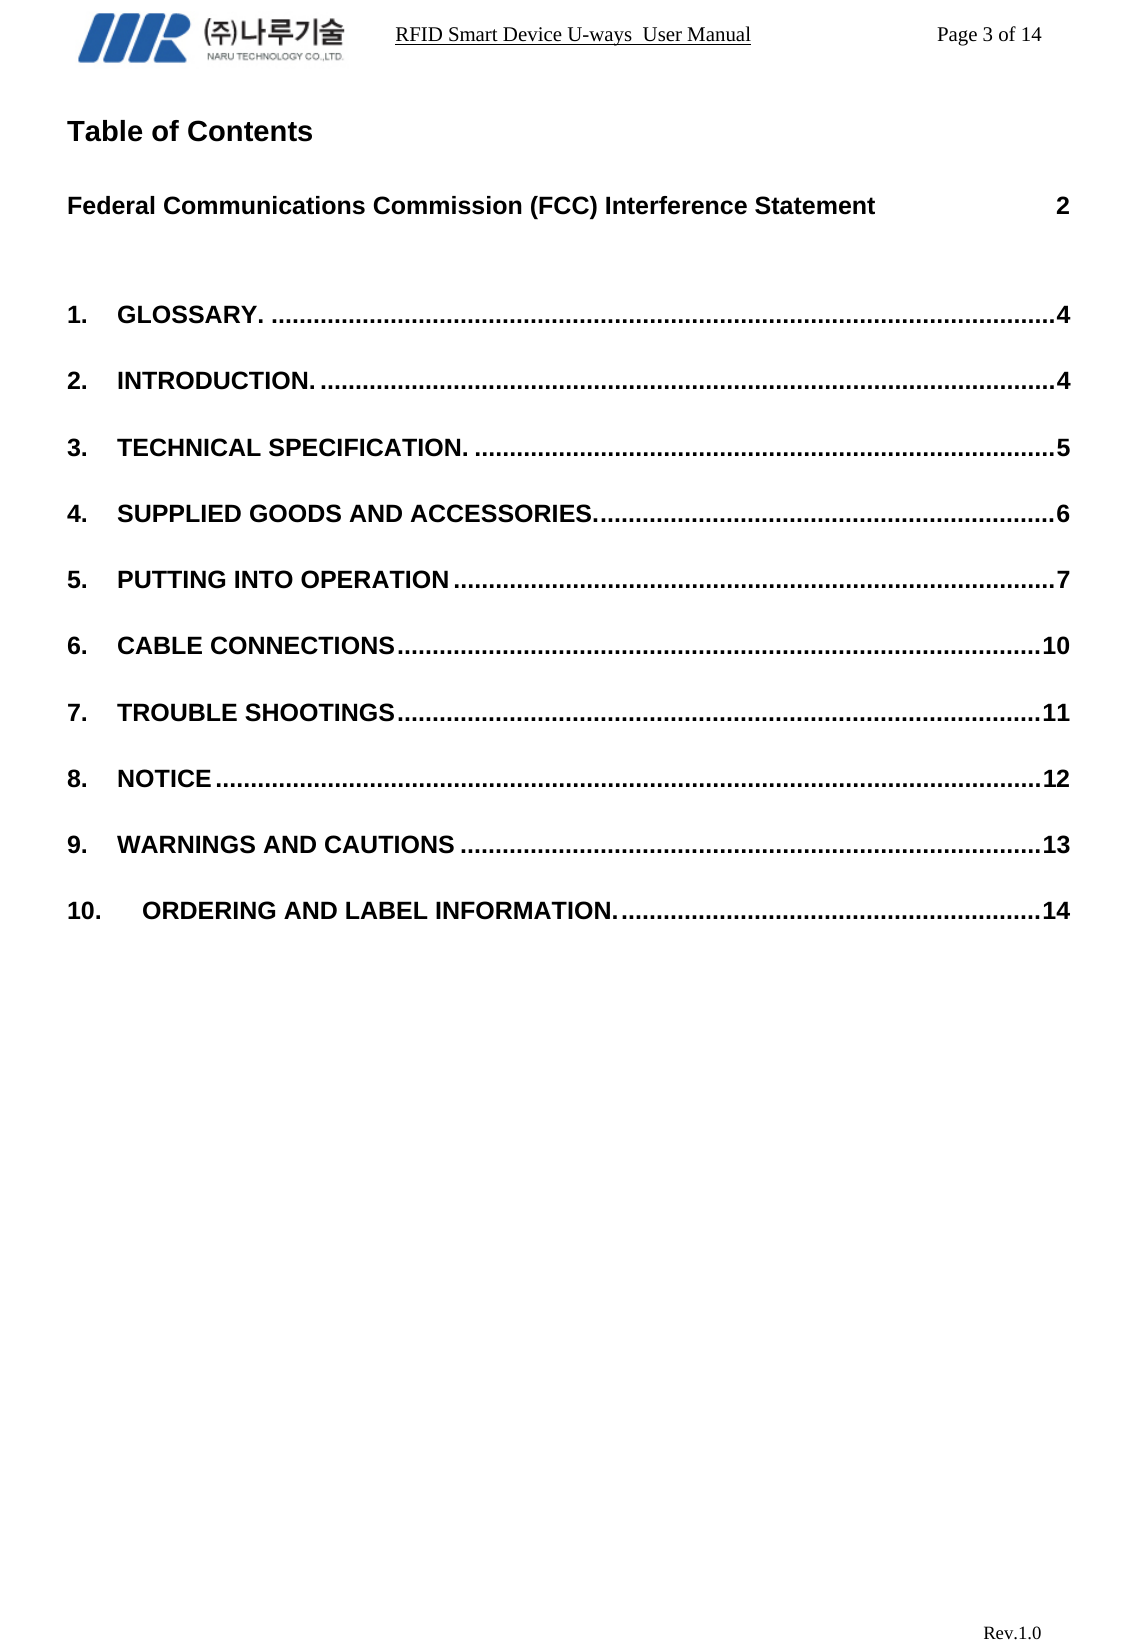                                                                RFID Smart Device U-ways  User Manual           Page 3 of 14                            Rev.1.0 Table of Contents  Federal Communications Commission (FCC) Interference Statement                          2  1. GLOSSARY. ................................................................................................................ 4 2. INTRODUCTION. ......................................................................................................... 4 3. TECHNICAL SPECIFICATION. ................................................................................... 5 4. SUPPLIED GOODS AND ACCESSORIES. .................................................................  6 5. PUTTING INTO OPERATION ...................................................................................... 7 6. CABLE CONNECTIONS ............................................................................................ 10 7. TROUBLE SHOOTINGS ............................................................................................ 11 8. NOTICE ...................................................................................................................... 12 9. WARNINGS AND CAUTIONS ................................................................................... 13 10. ORDERING AND LABEL INFORMATION. ............................................................ 14      